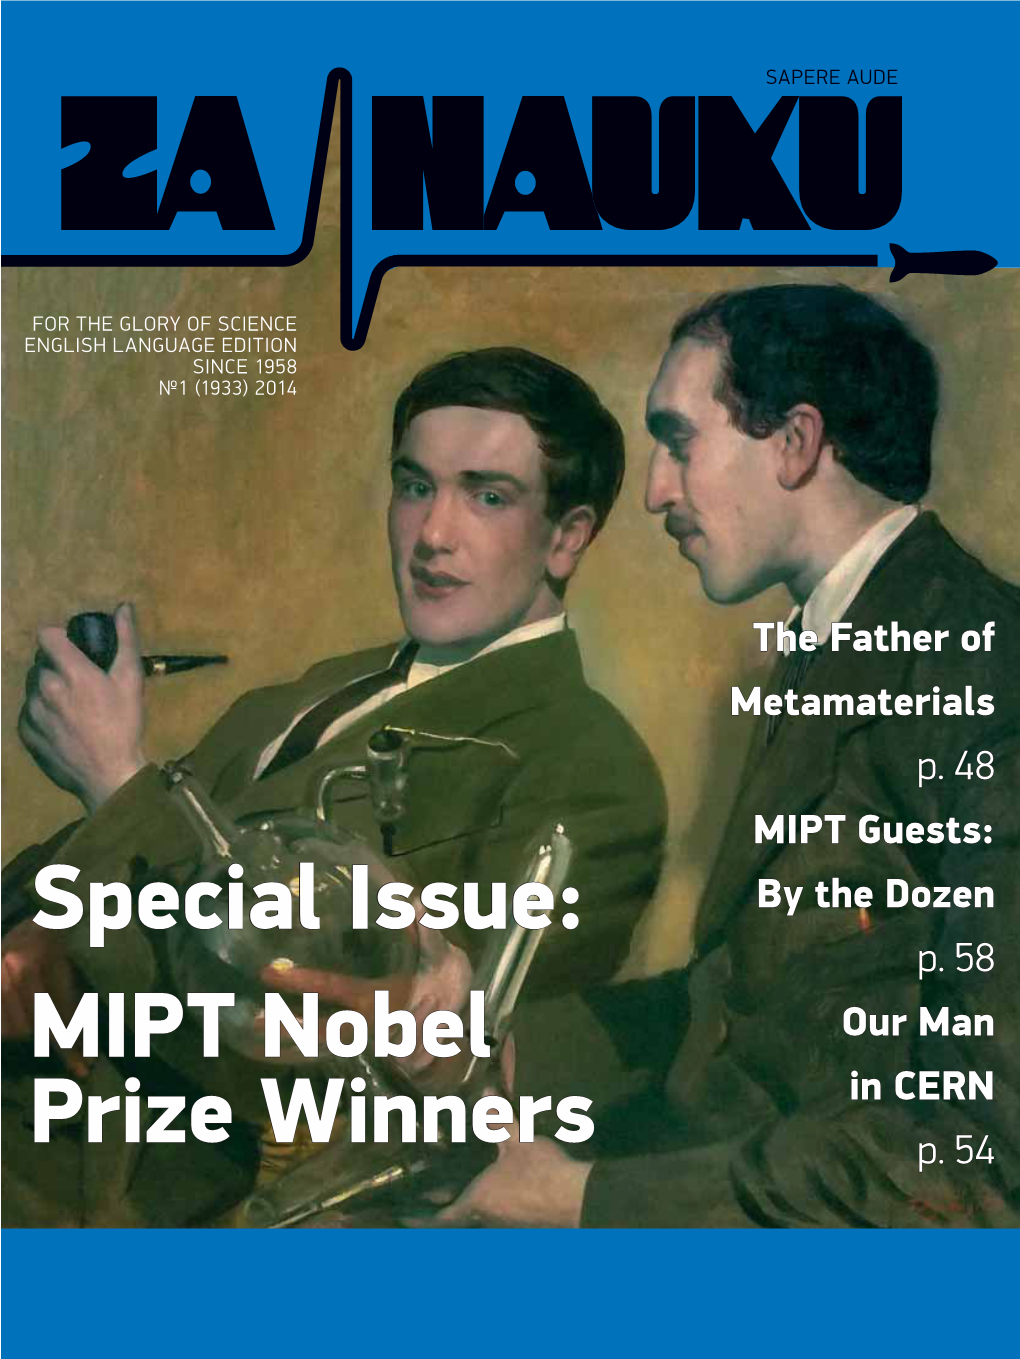 Special Issue: MIPT Nobel Prize Winners